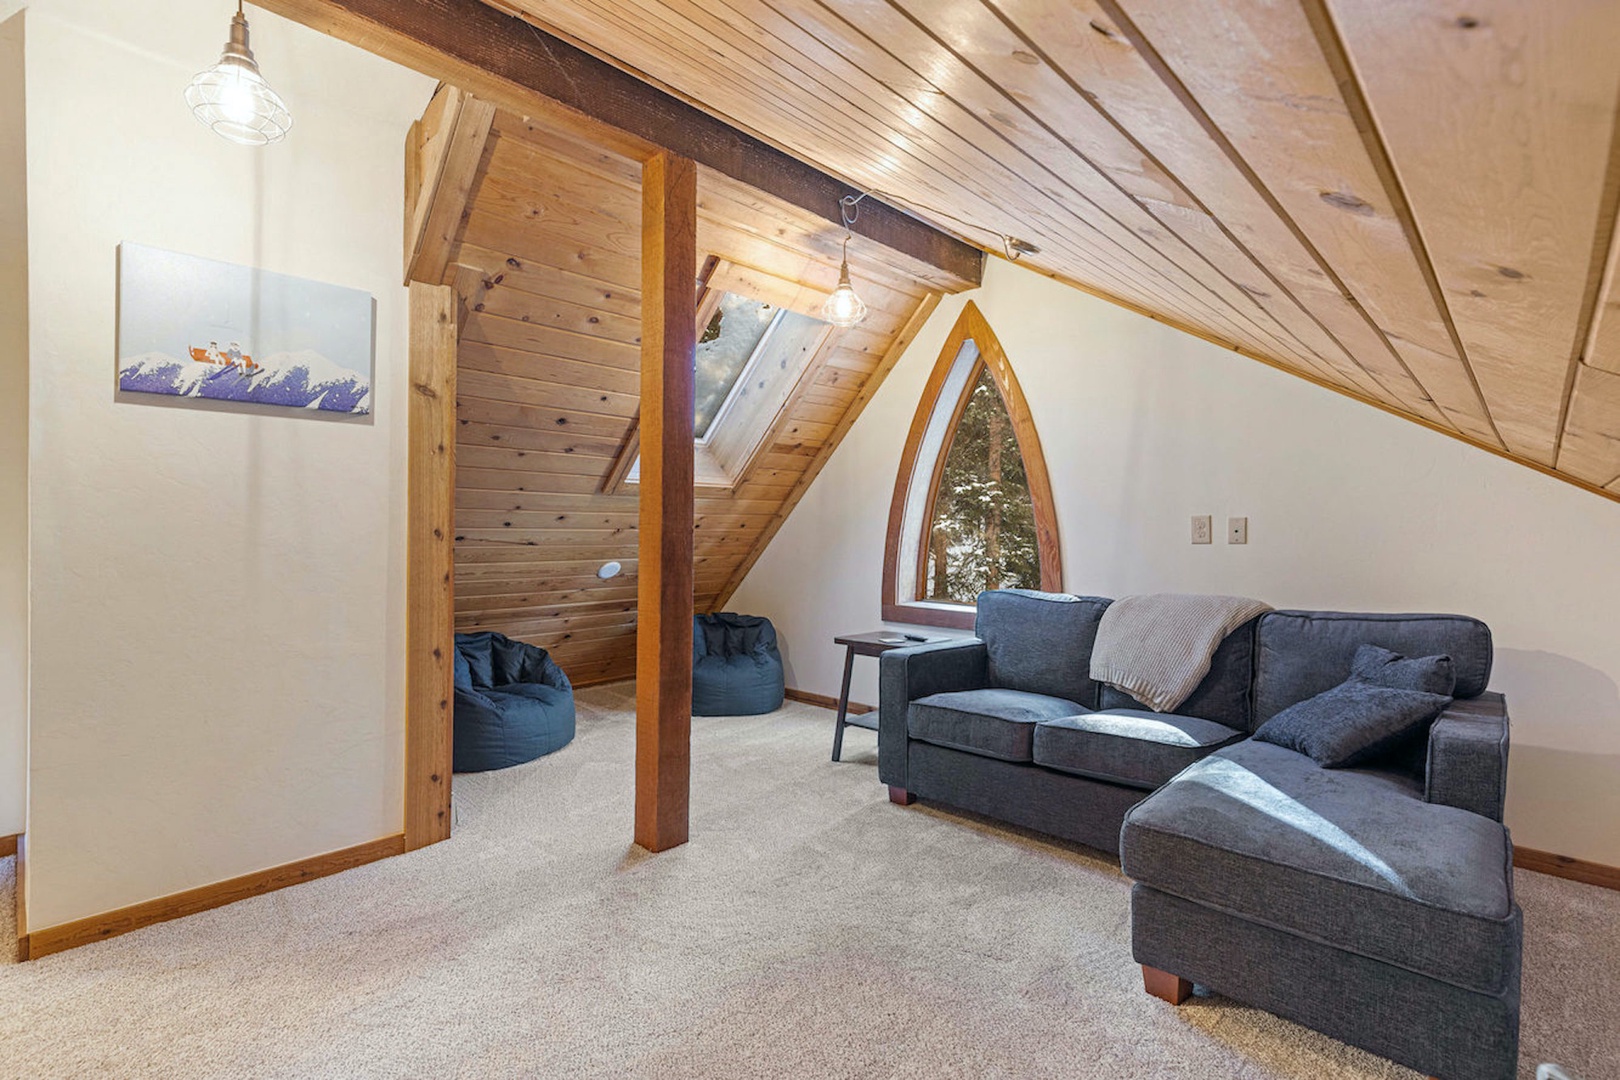 Lounge the day away & stream all your favorites in the upper-level loft